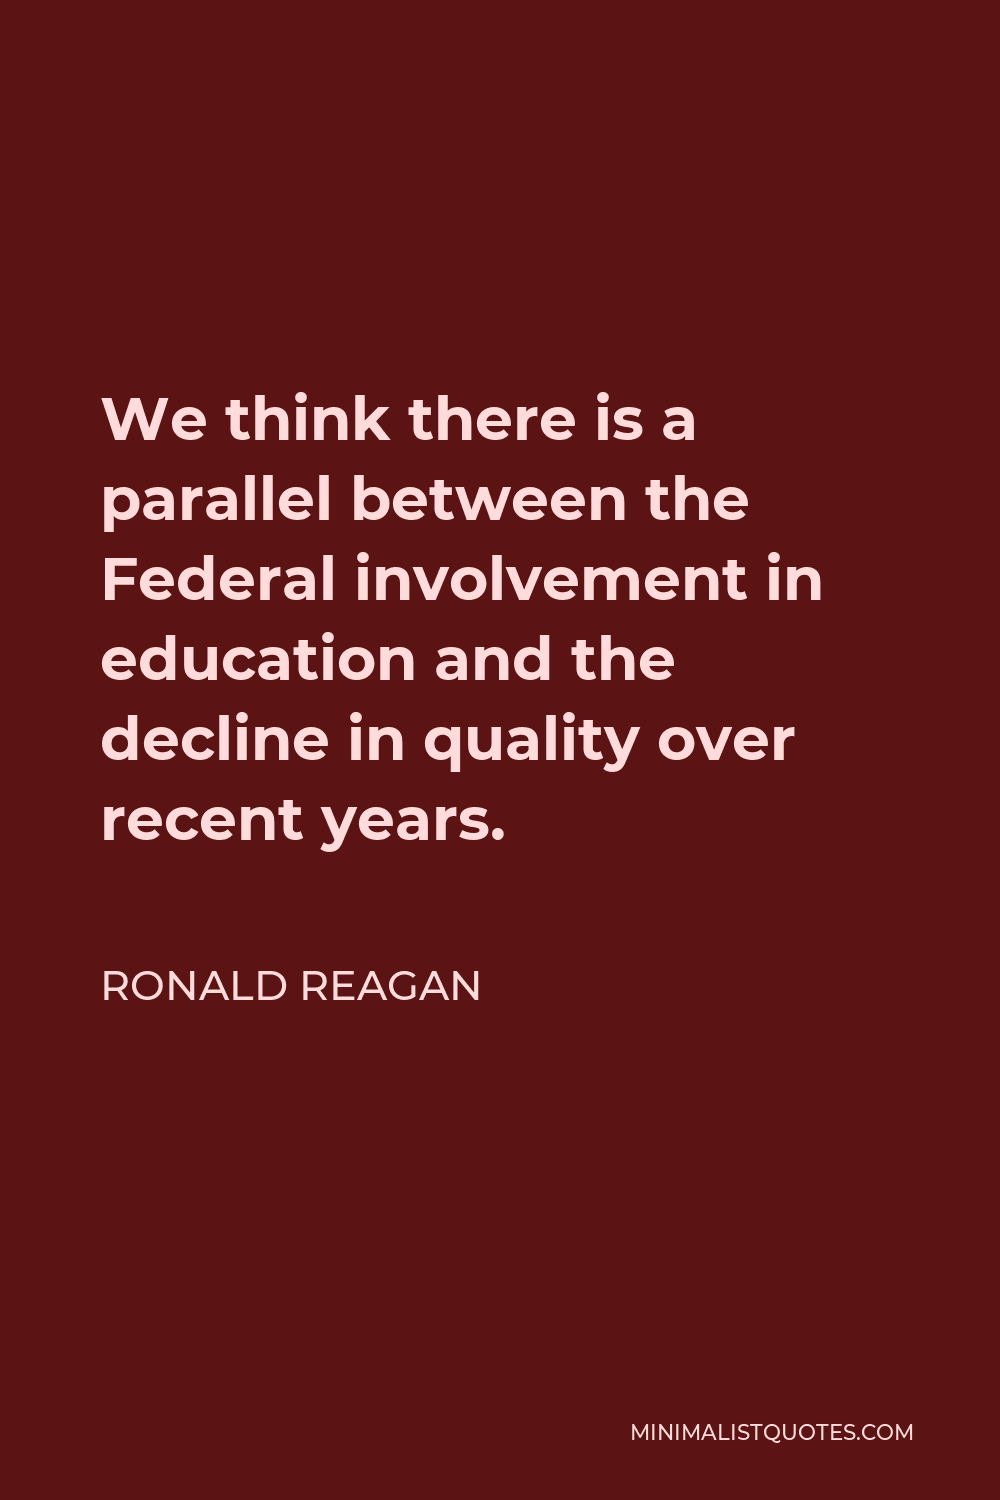 Ronald Reagan Quote - We think there is a parallel between the Federal involvement in education and the decline in quality over recent years.